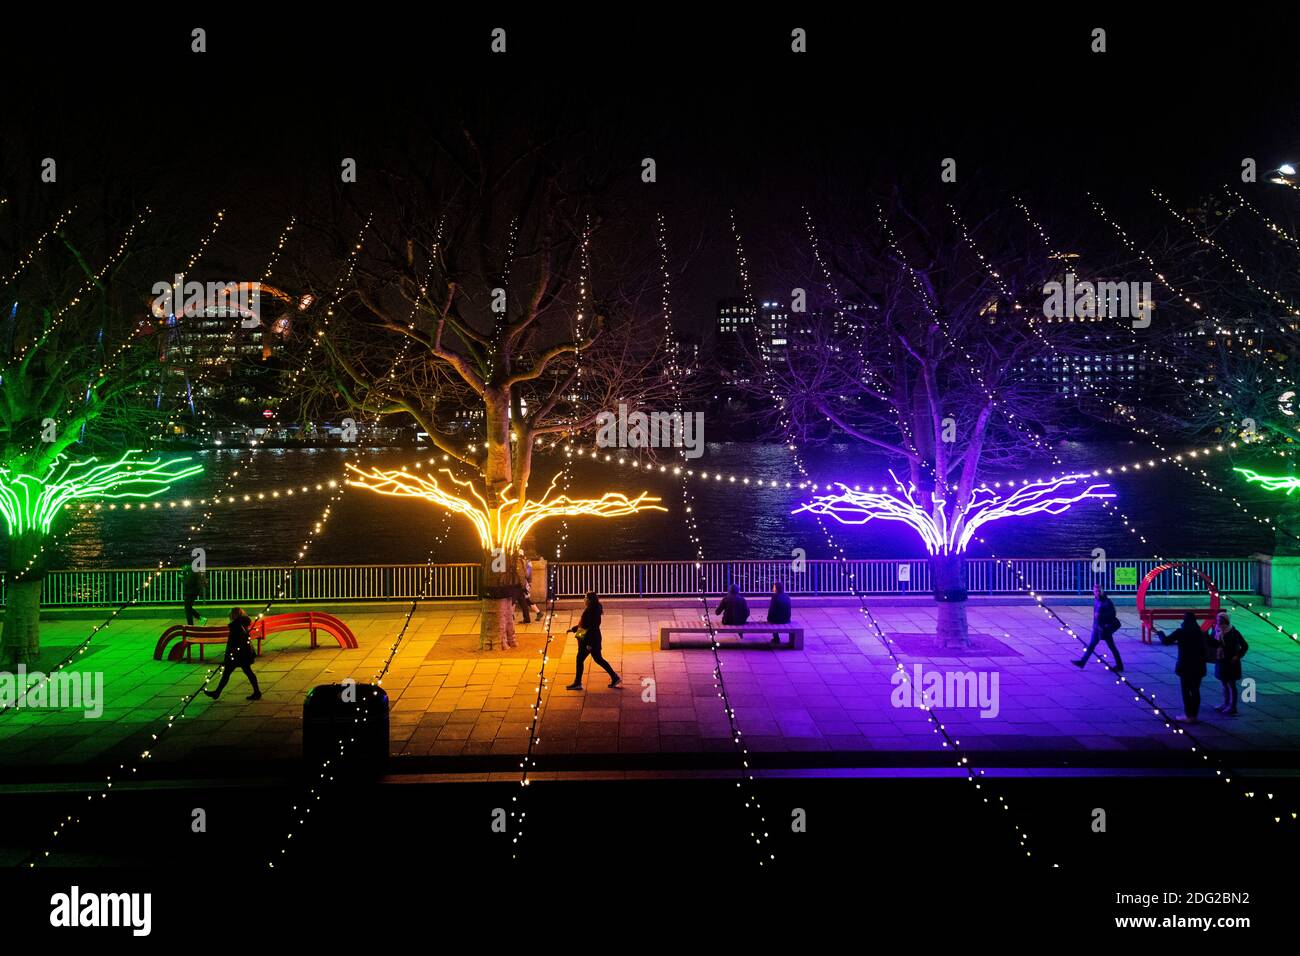 Pedestrians pass 'Lumen' by David Ogle, a row of riverside plane trees illuminated by neon flex, part of 'Winter Light', a new open-air exhibition at the Southbank Centre in London, which features over 15 artworks and new commissions that make use of light, colour and animation from a number of international artists. Stock Photo